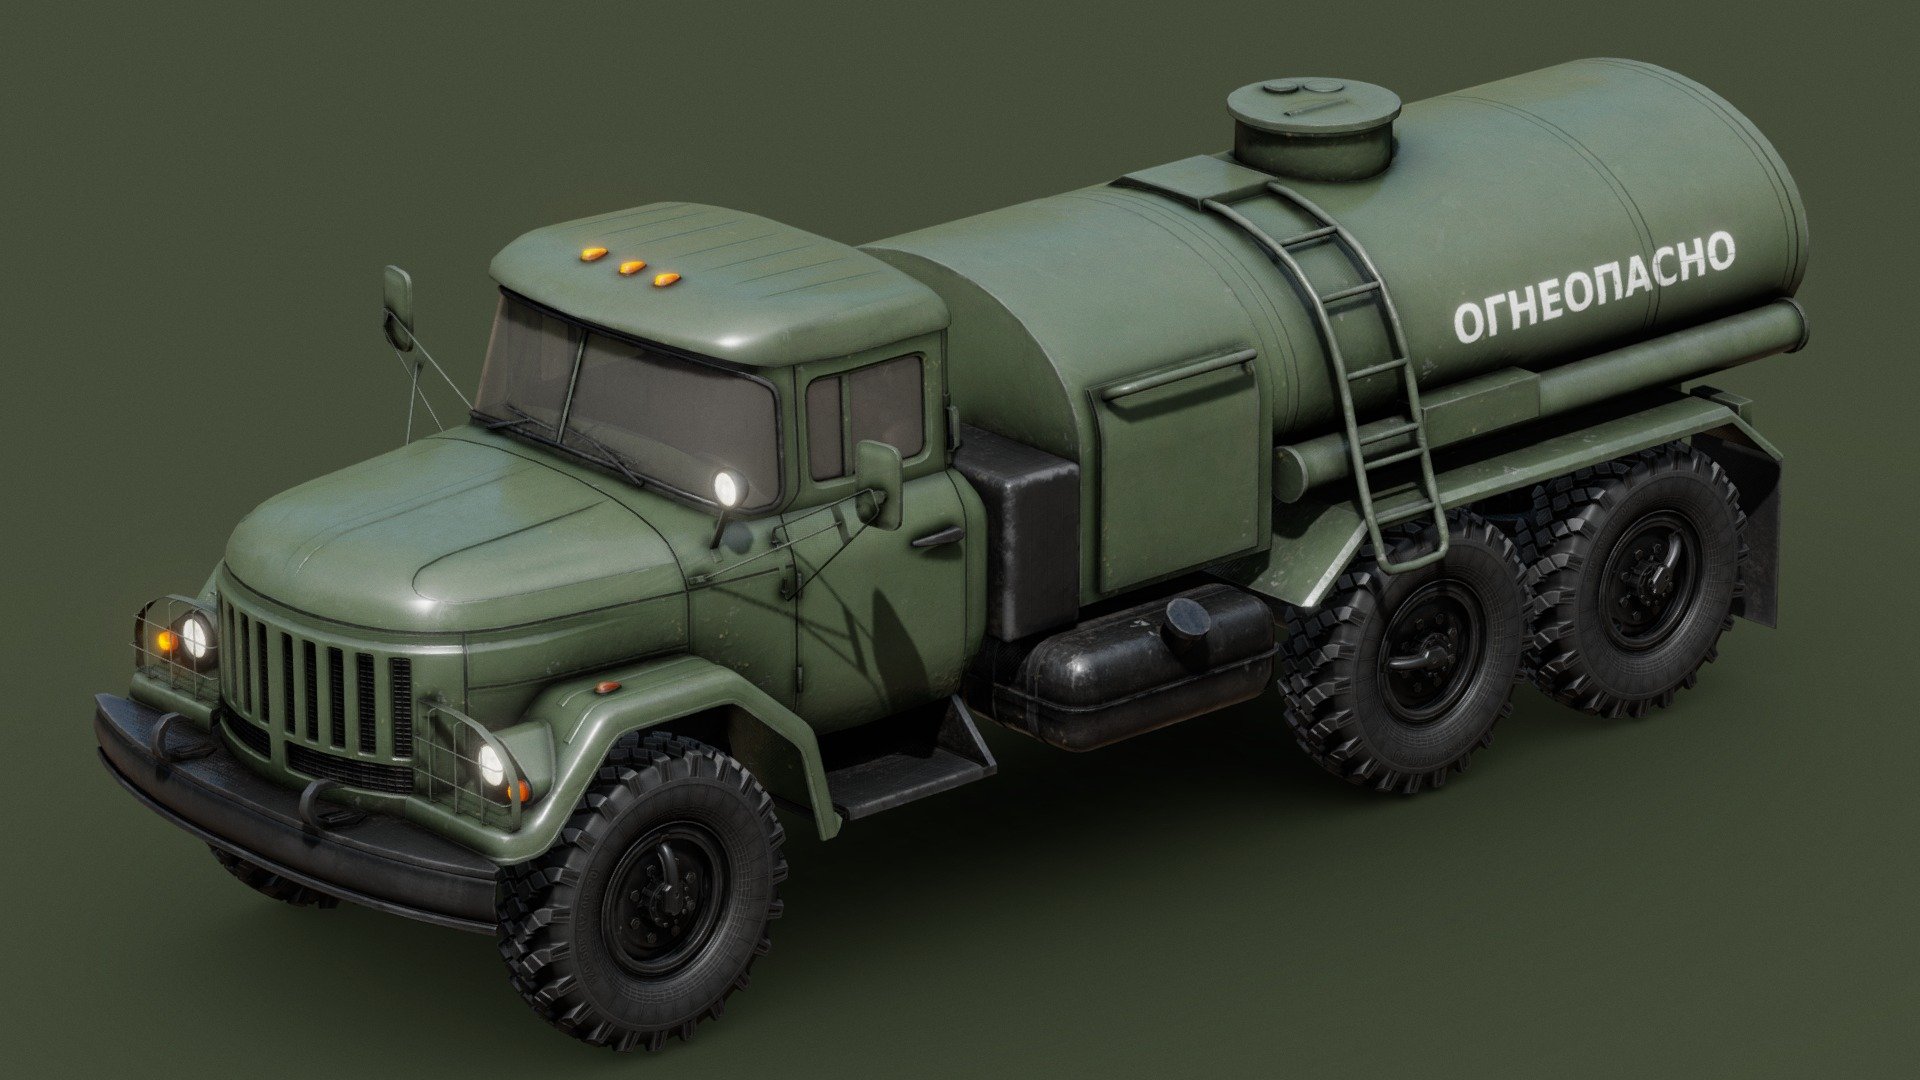 General purpose 3.5 tonne 6x6 army truck designed in the Soviet Union. Here, in Fuel Tanker Truck version.

Separate materials for: cabin, interior, glass, frame, wheel and tank.

Wheels are separate objects.

4k PBR textures for cabin, interior and tank. 2k for frame and wheel. 1k for the glass.

Textures for glass and command module with alpha transparency 3d model